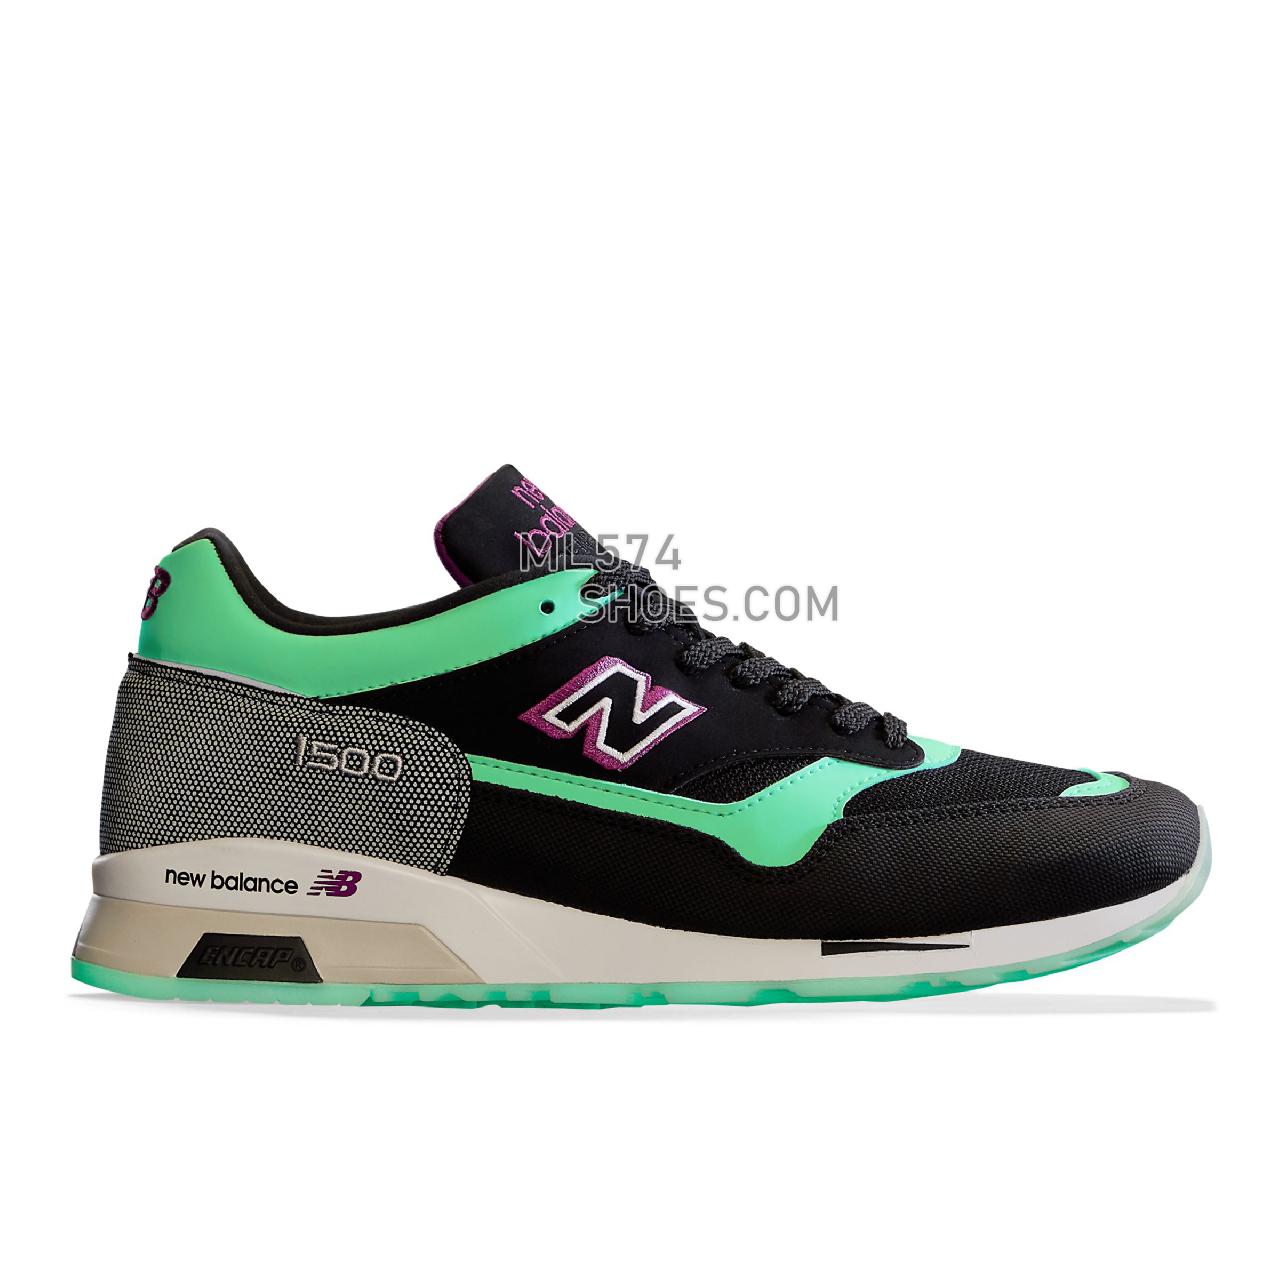 New Balance Made in UK 1500 - Men's Made in USA And UK Sneakers - Black with Glow and Purple - M1500GID